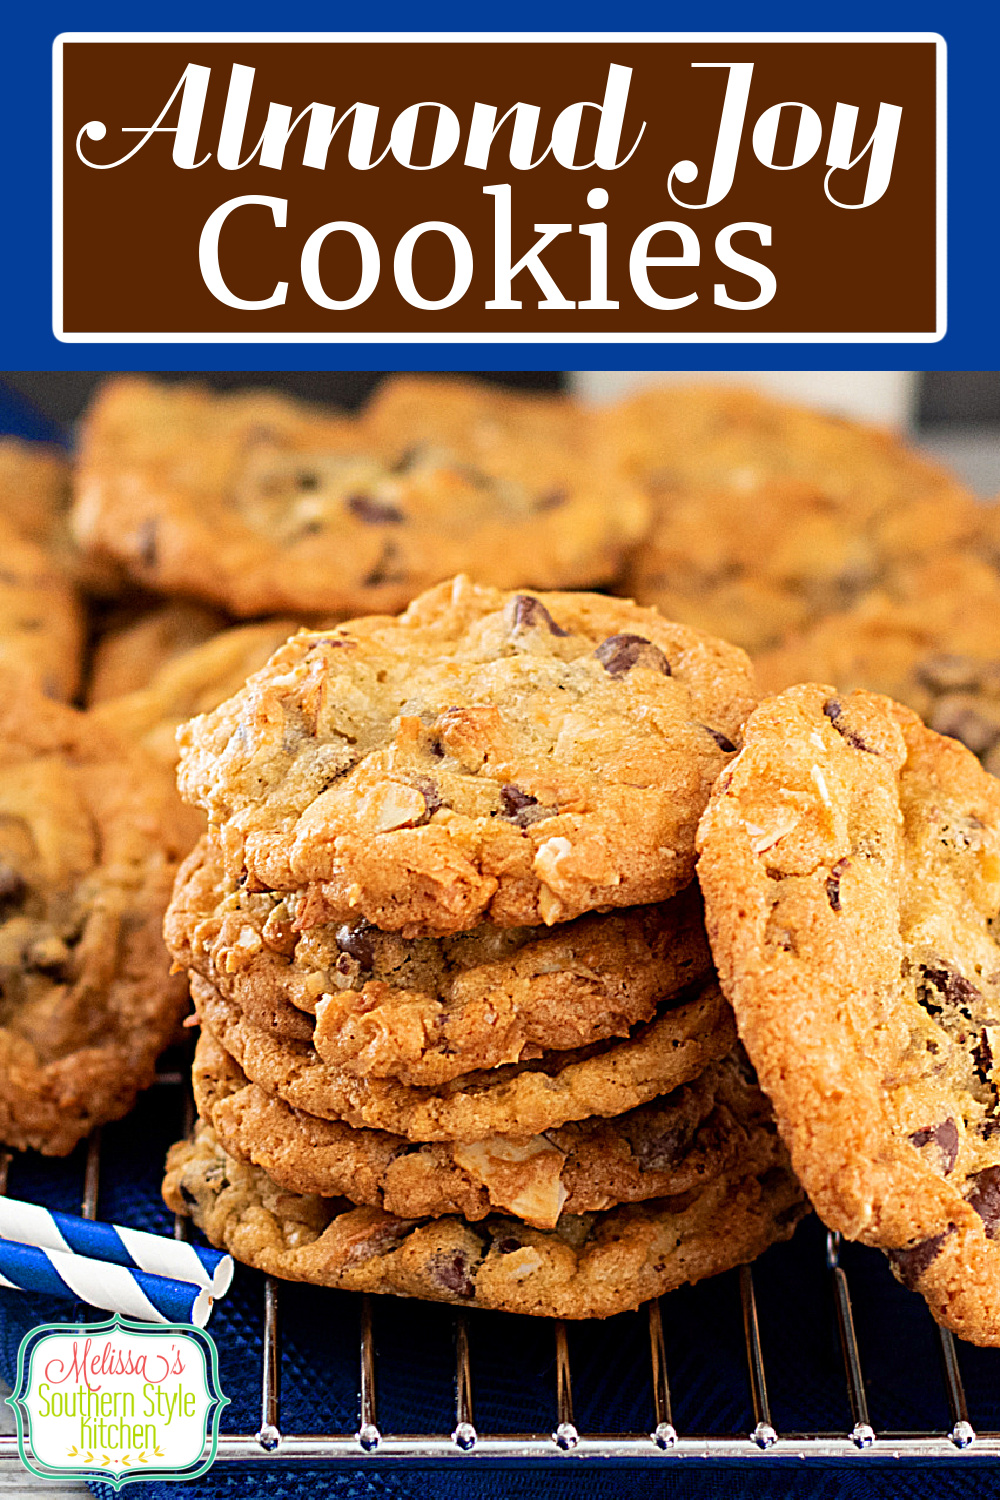 The flavors in these buttery made from scratch cookies were inspired by Almond Joy candy bars #almondjoycookies #cookies #cookierecipes #holidaybaking #christmascookies #southernrecipes #chocolatechipcookies #bestcookierecipes